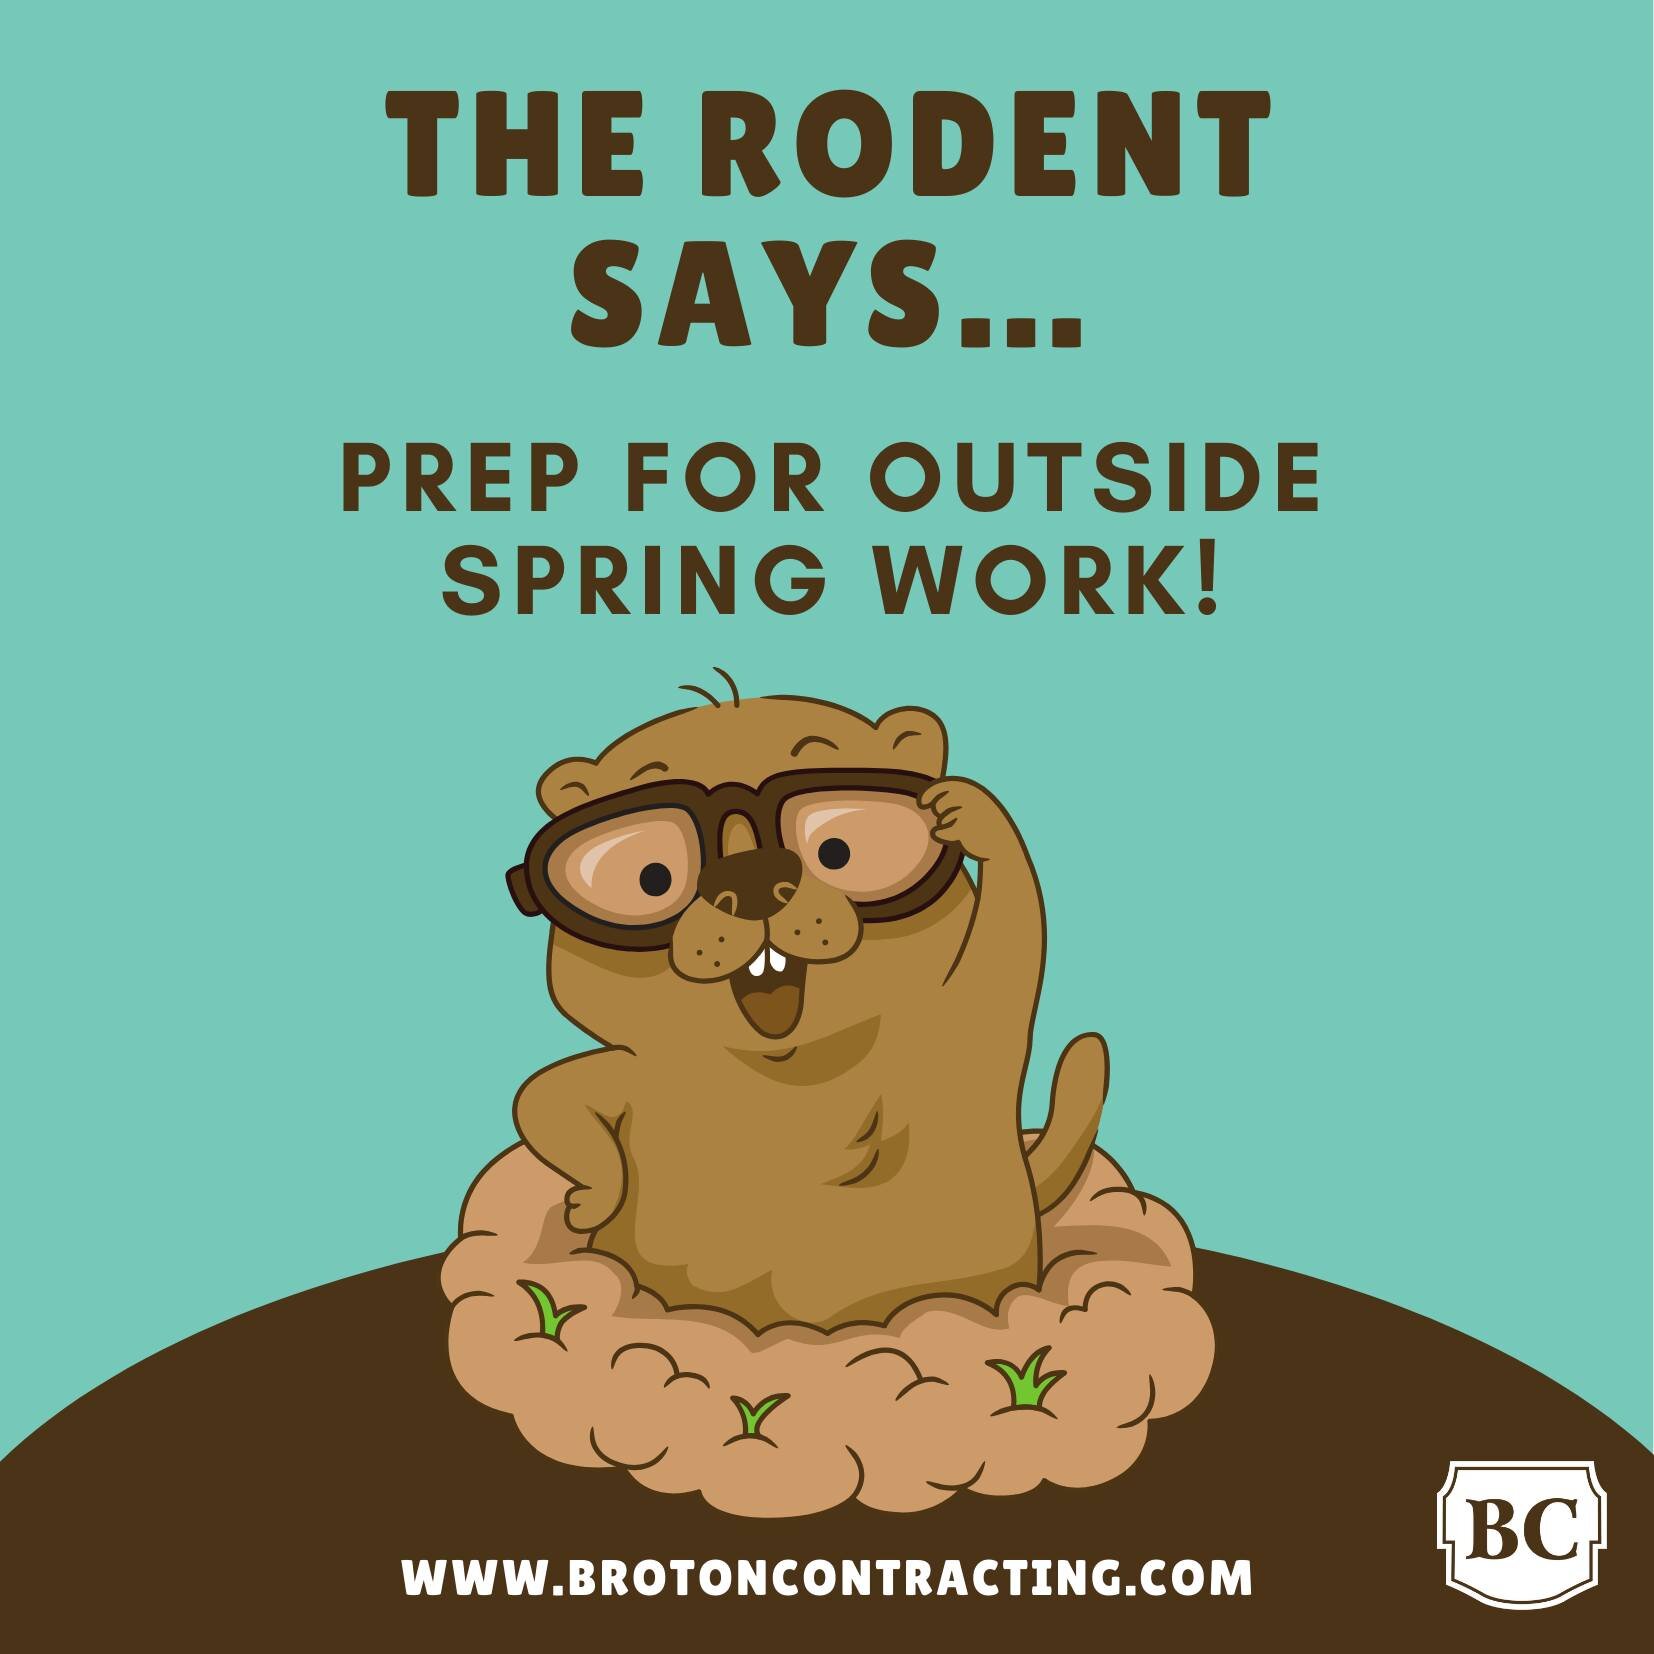 🐾 Looks like Punxsutawney Phil and Staten Island Chuck are on the same page this year - no shadows in sight! 👤

That means it's officially time to kickstart those outdoor projects with Broton Contracting. 🌱 Who needs winter lingering around when w